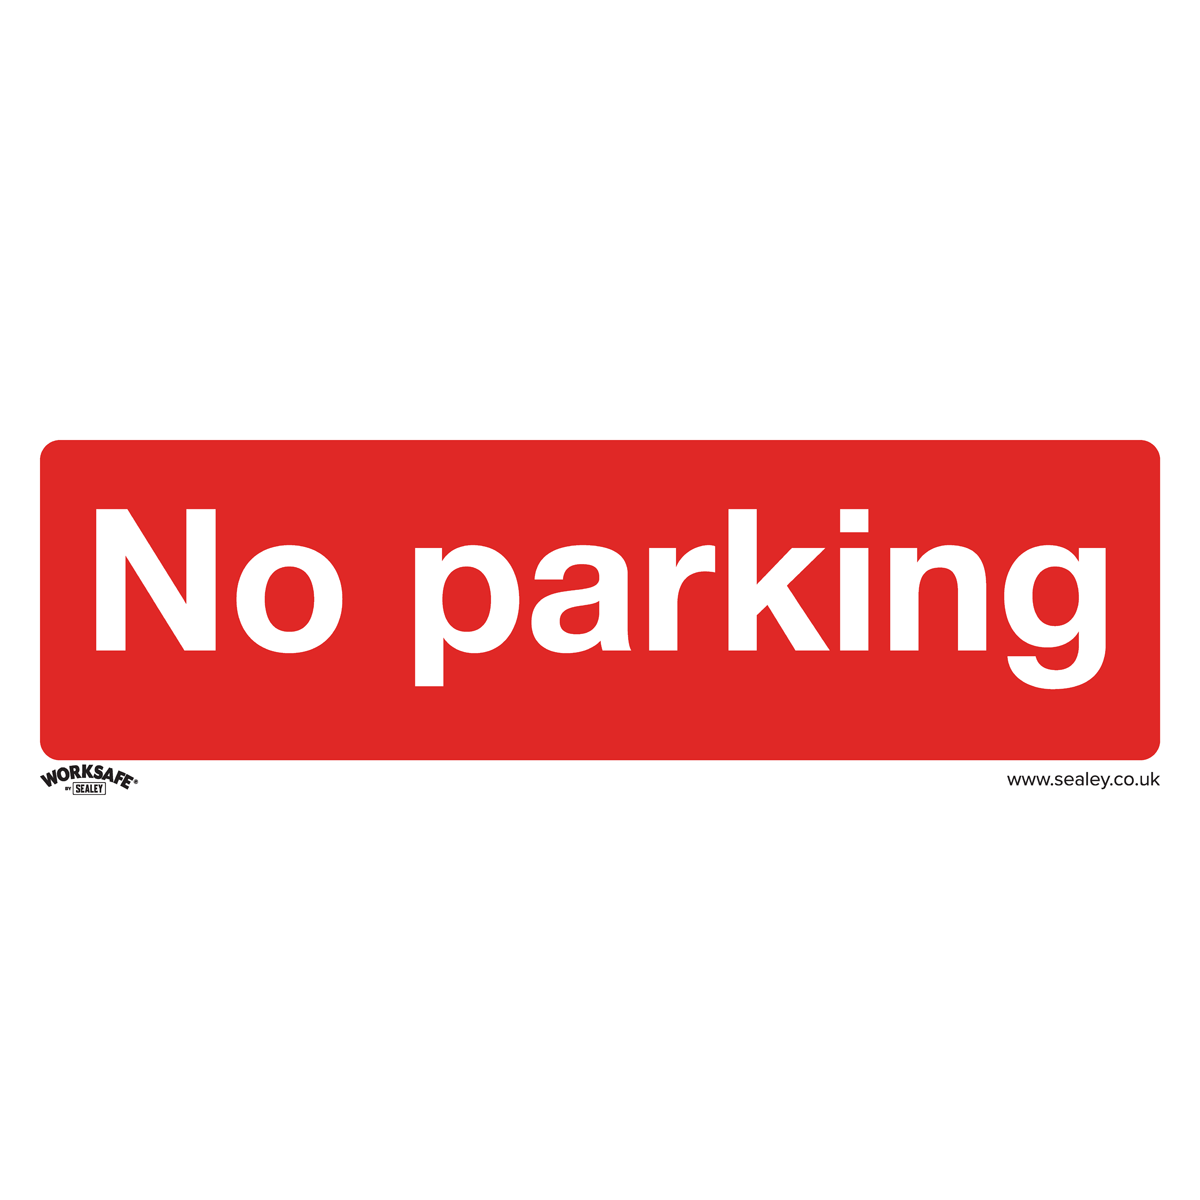 Sealey Prohibition Safety Sign - No Parking - Self-Adhesive Vinyl - Pack of 10